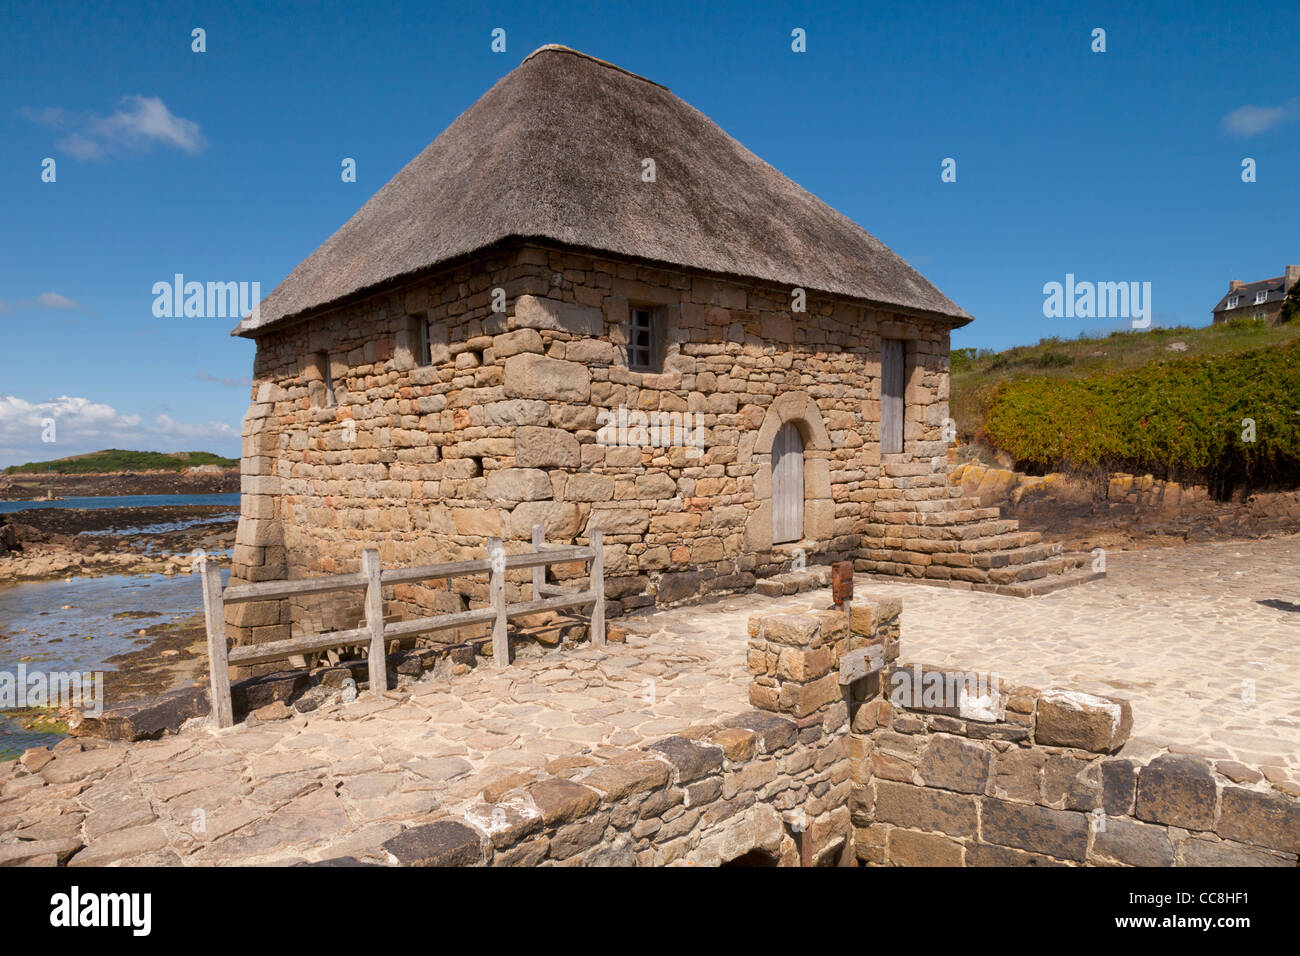 The Moulin de Berlot, an old tide mill on the Ile de Brehat, off the coast of Brittany, France. Stock Photo